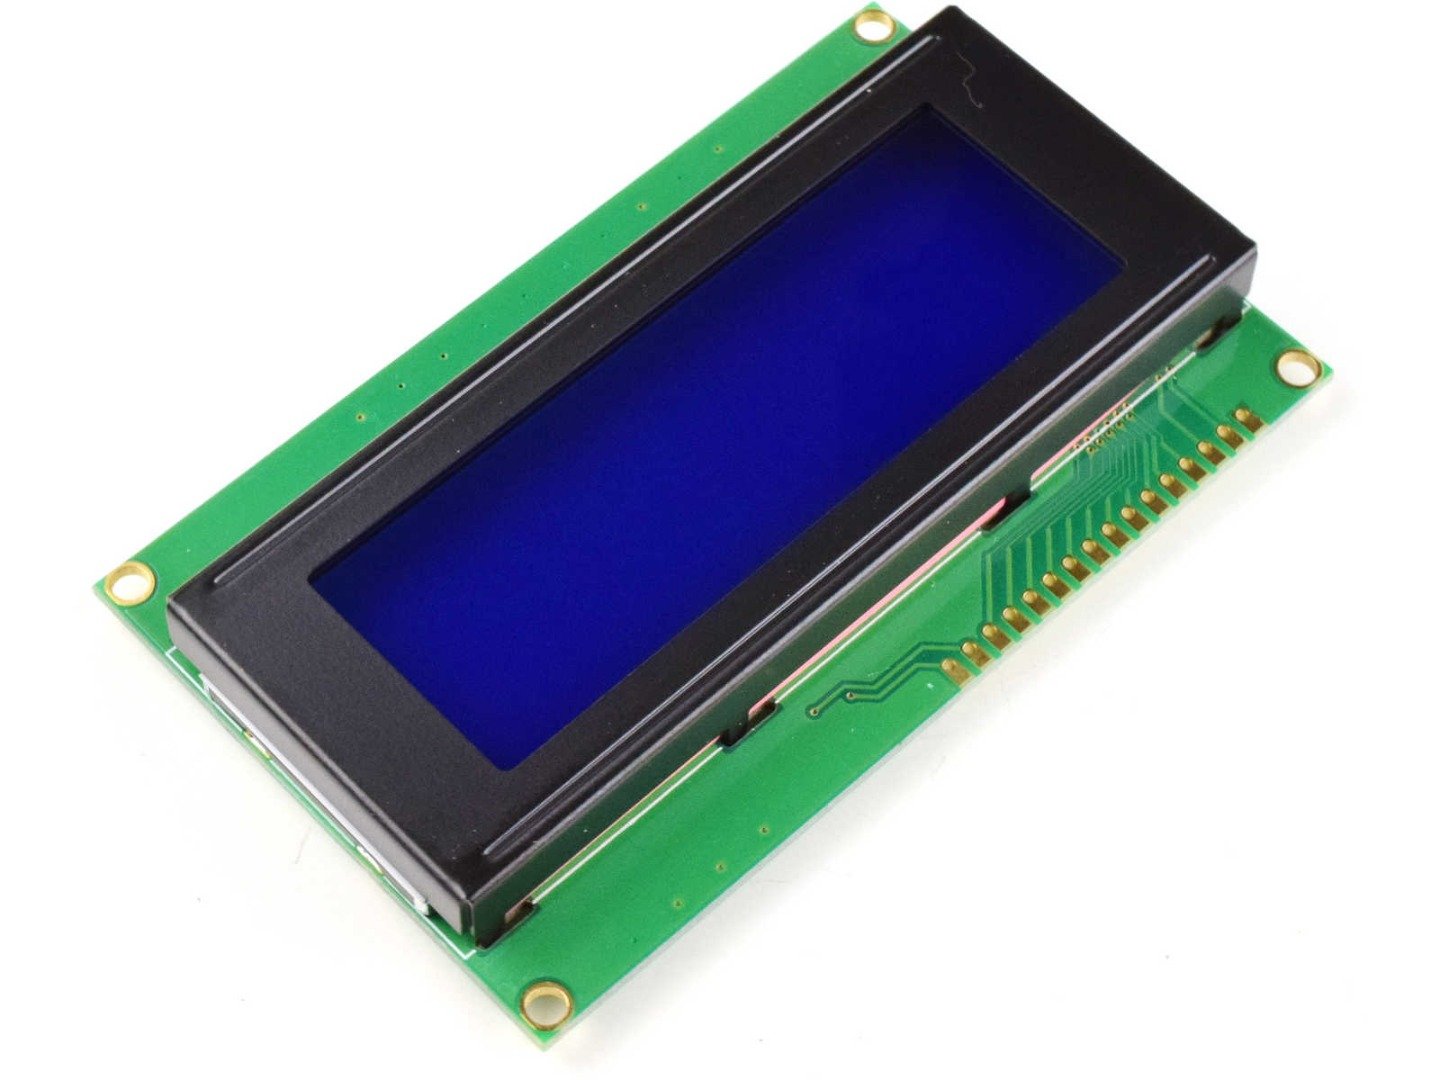 LCD 2004 20×4 Blue, White Backlight, parallel or I2C serial 5